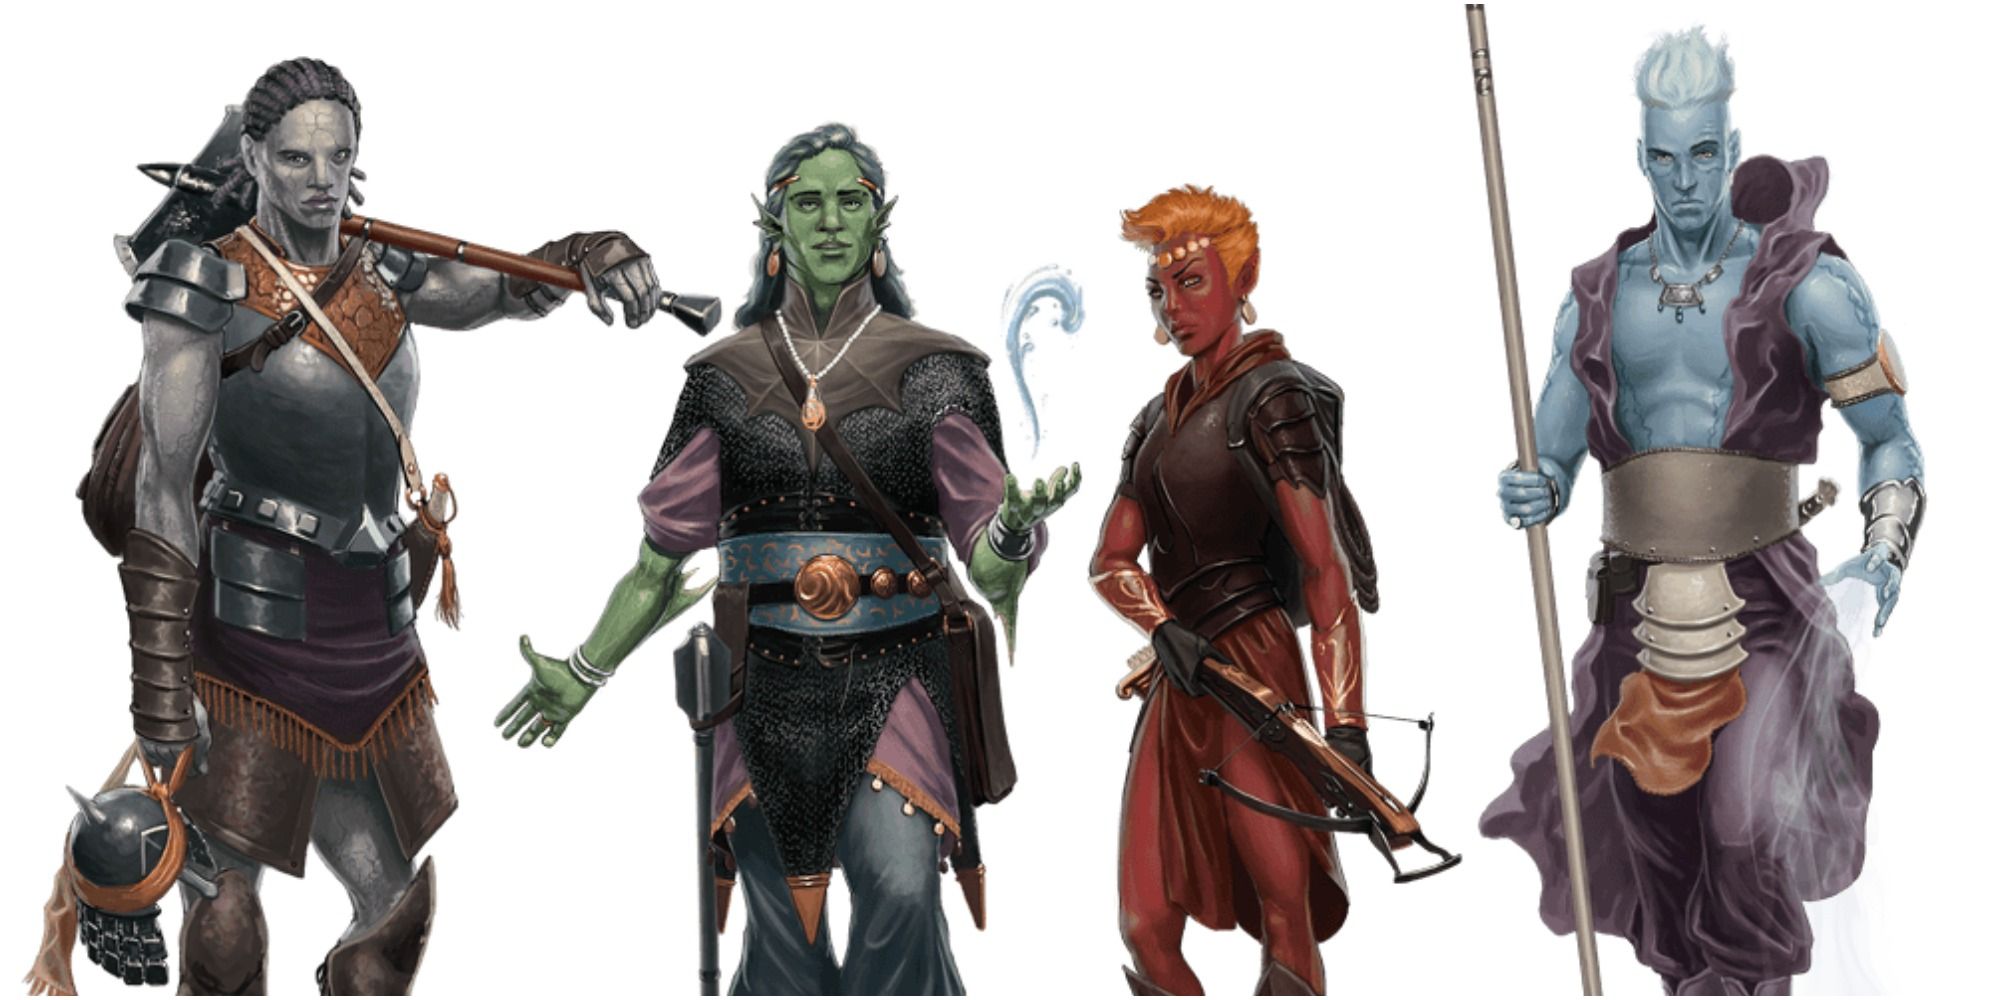 3. Blue-Haired Air Genasi: A Guide to Their Abilities and Culture - wide 4